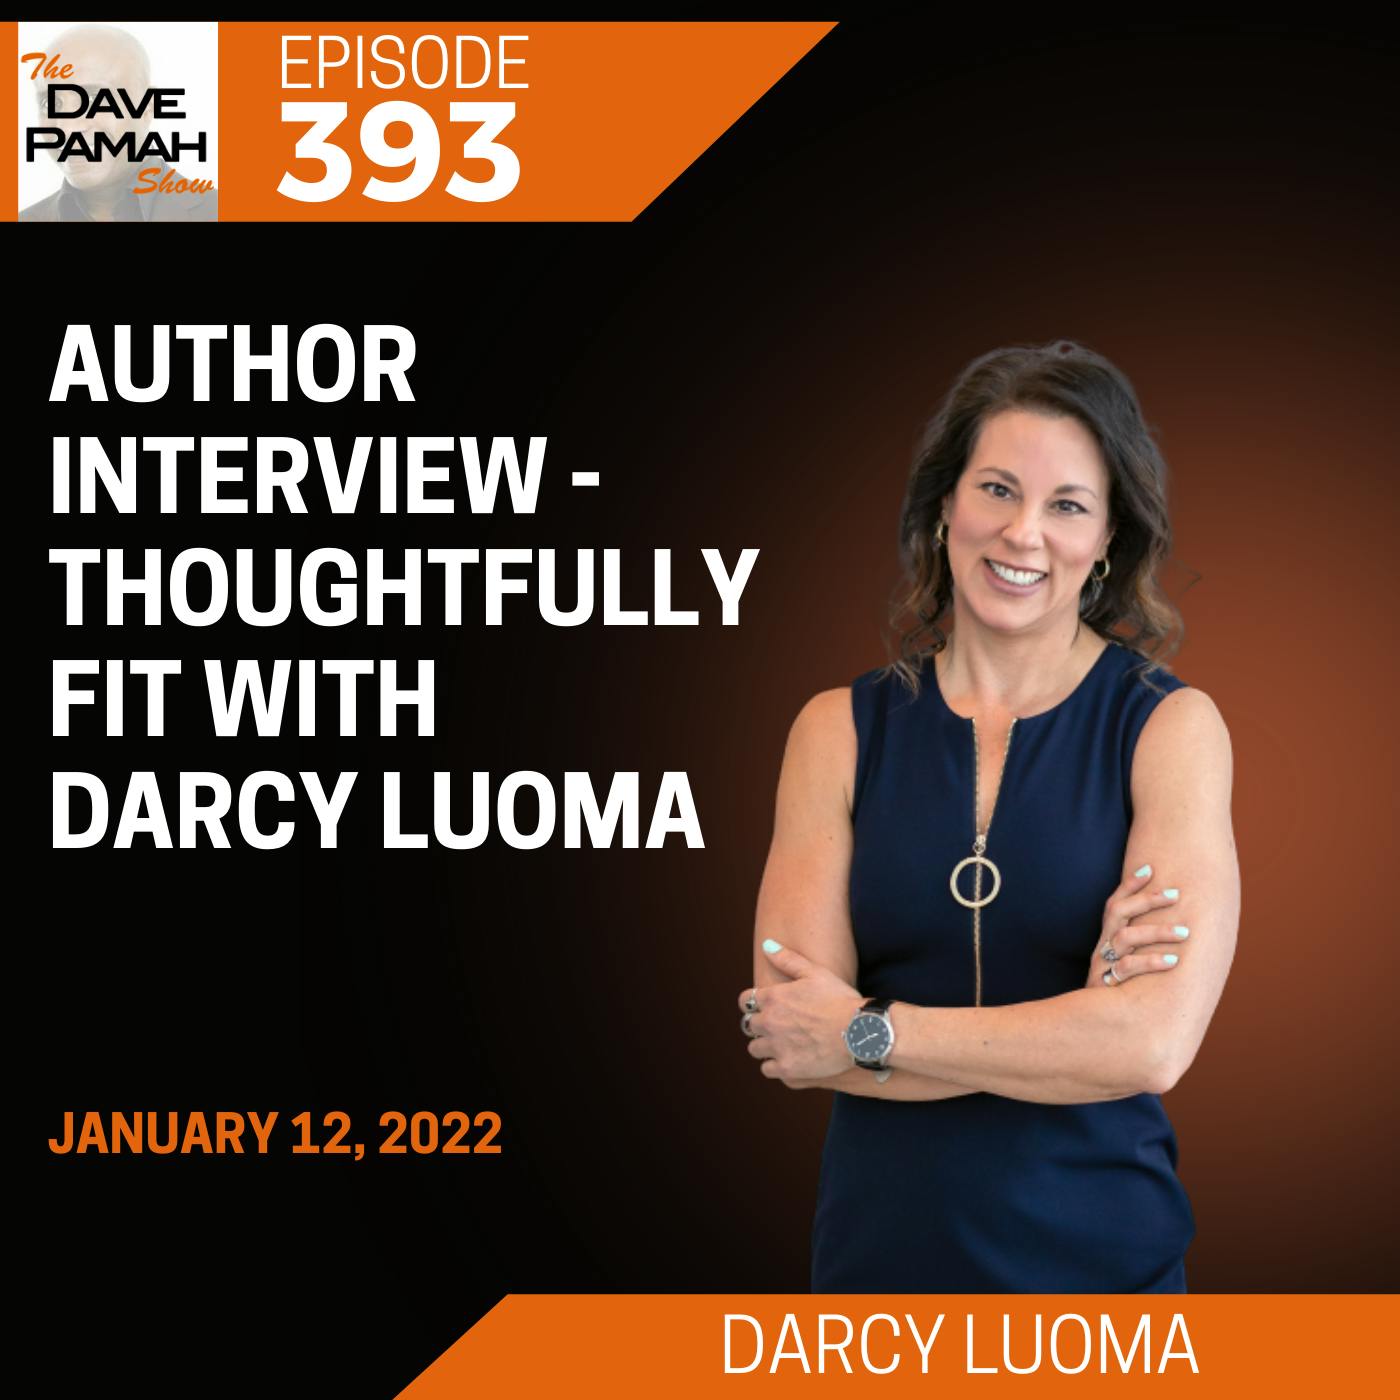 Author interview - Thoughtfully Fit with Darcy Luoma